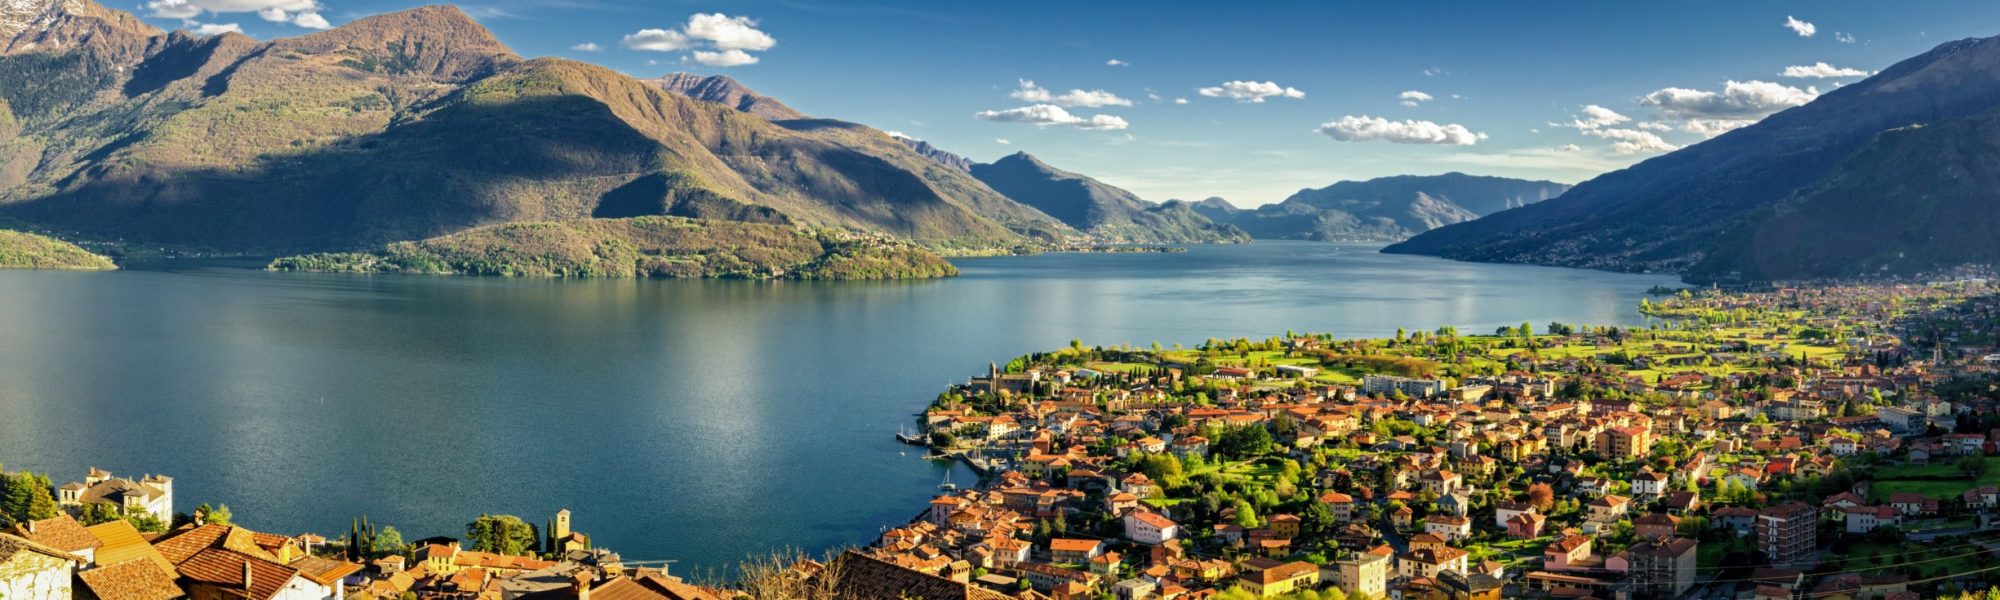 A landscape shot of the beautiful lake como in Gravedona, Italy which is seen on a customized tour from Jaya Travel & Tours. In the image, the sun shines on the small Italian town with the lake and mountains in the background.